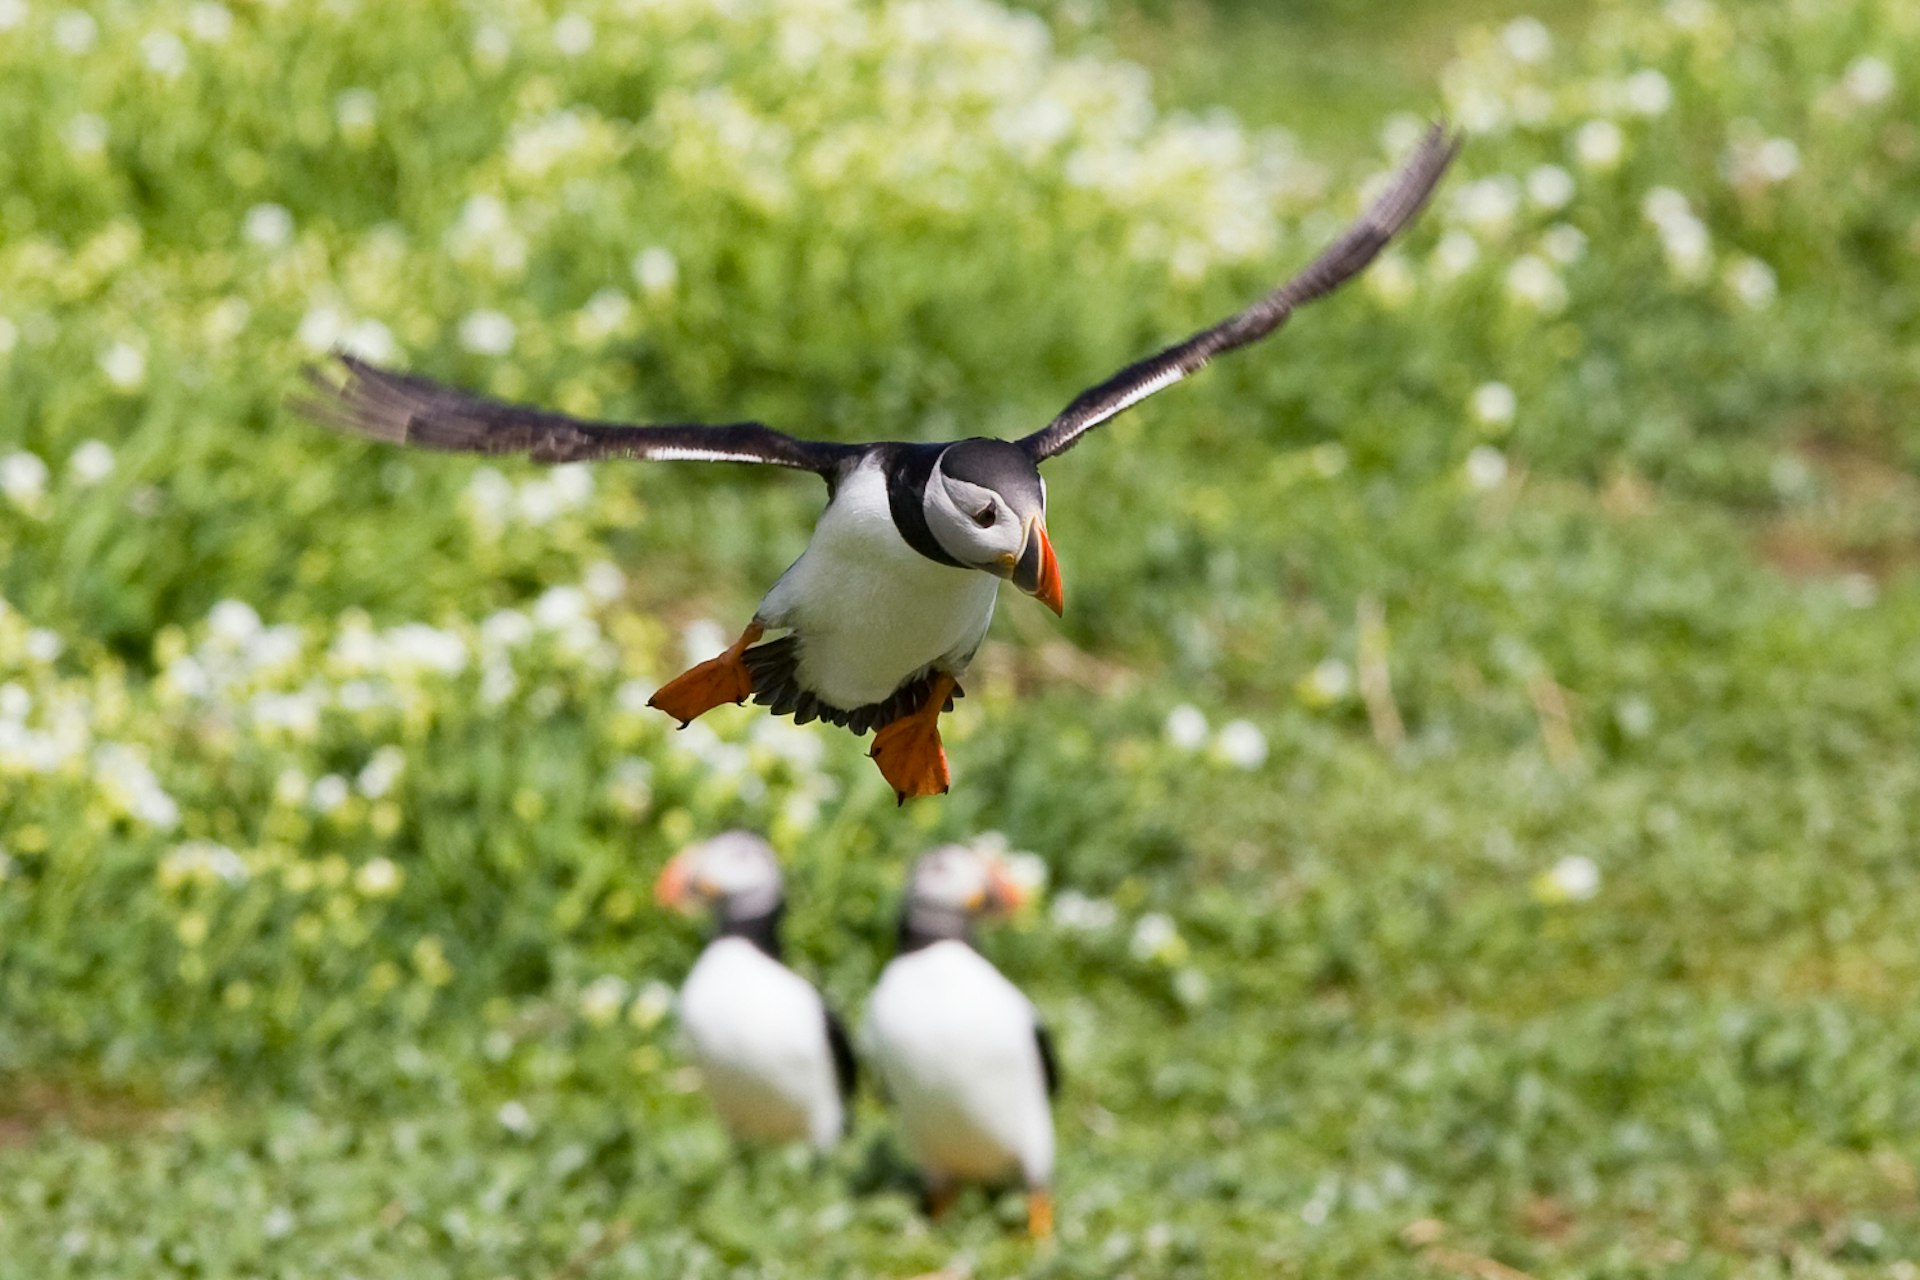 A puffin comes in to land on the Farne Islands. Image by Tony Smith / CC BY 2.0